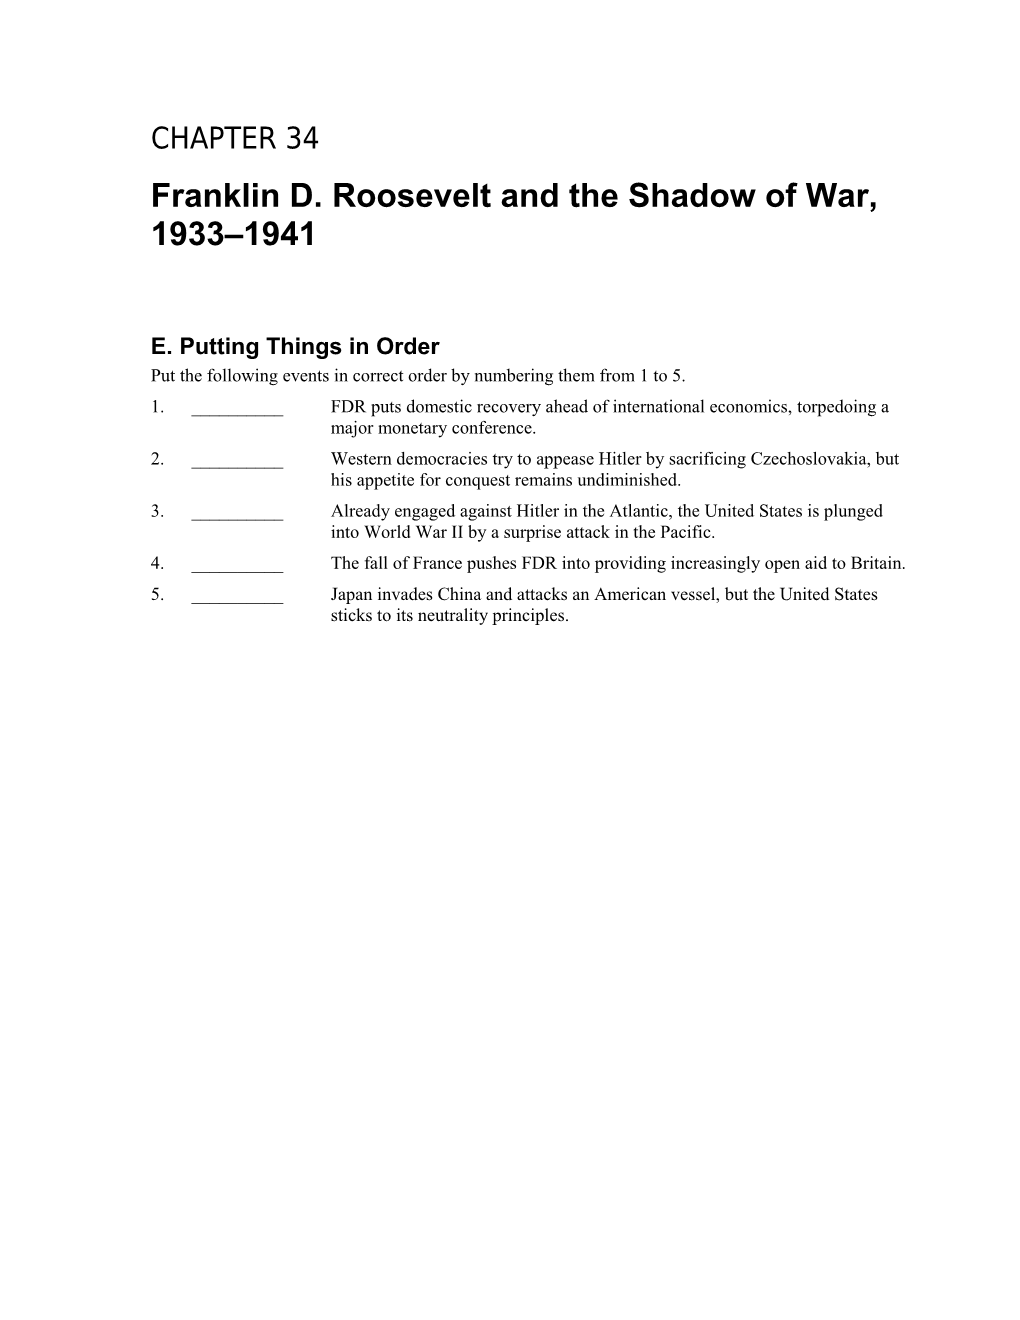 Franklin D. Roosevelt and the Shadow of War, 1933 1941